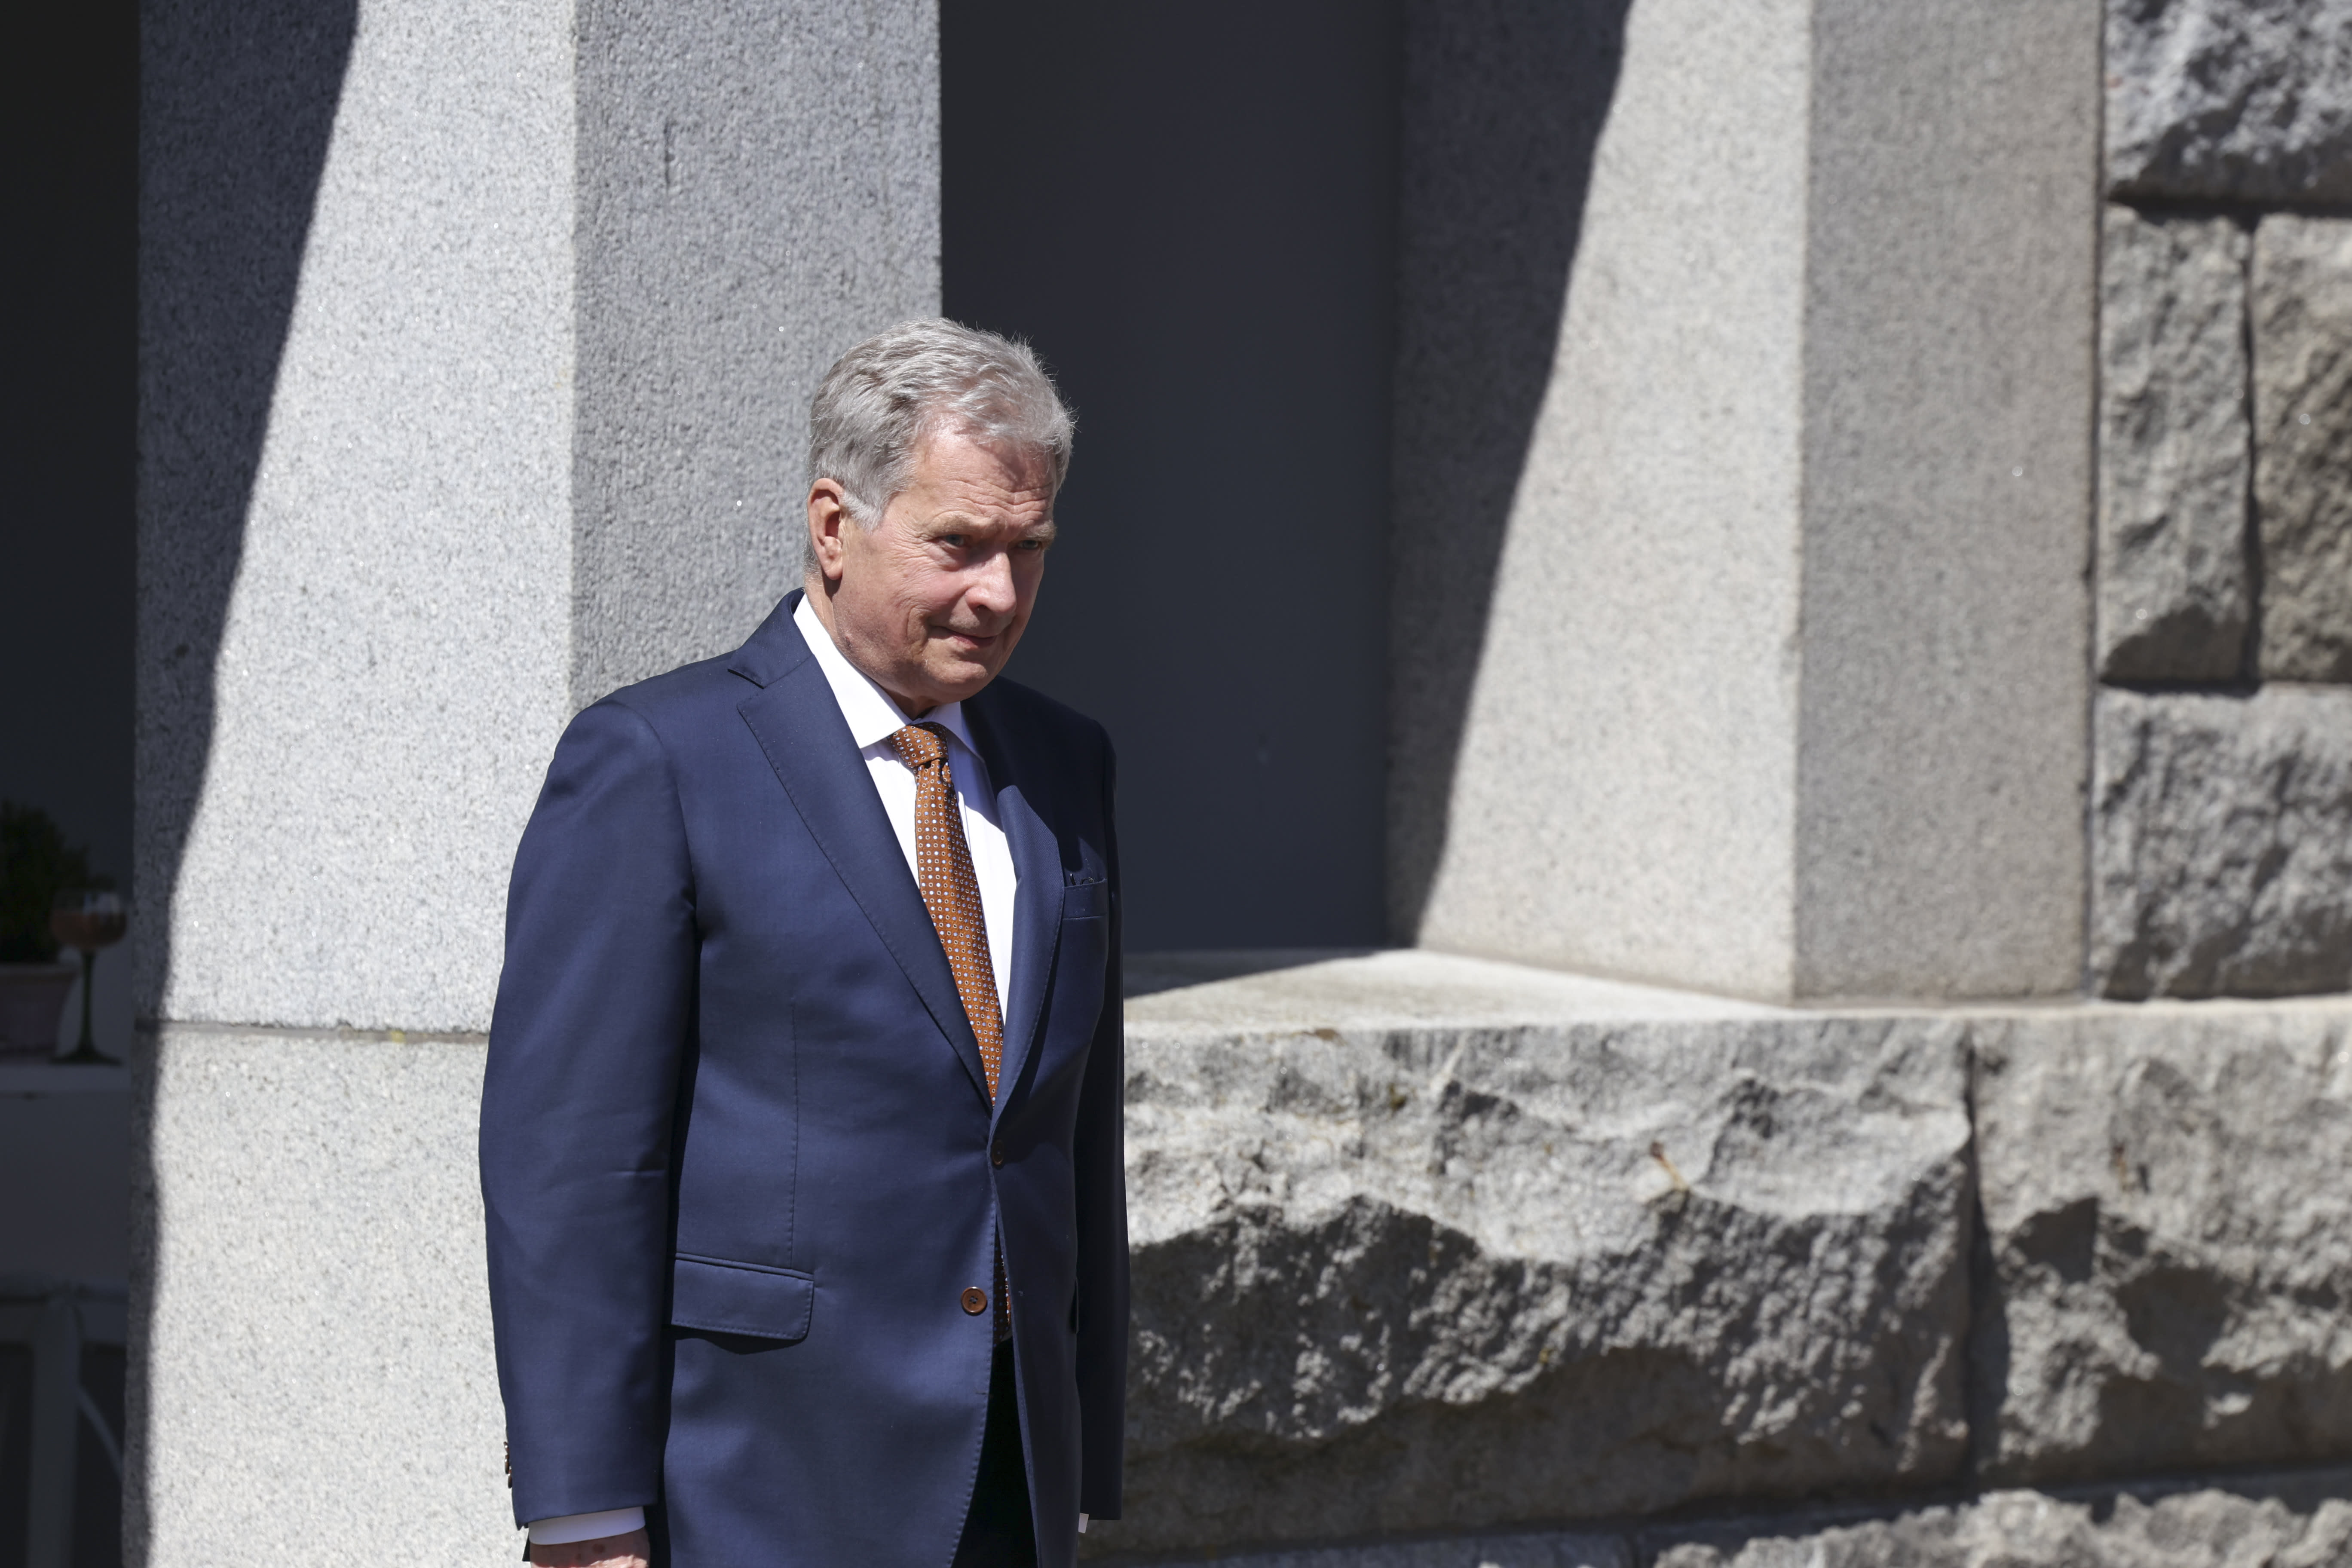 President of Finland: NATO’s ratification process underway  "faster than expected"